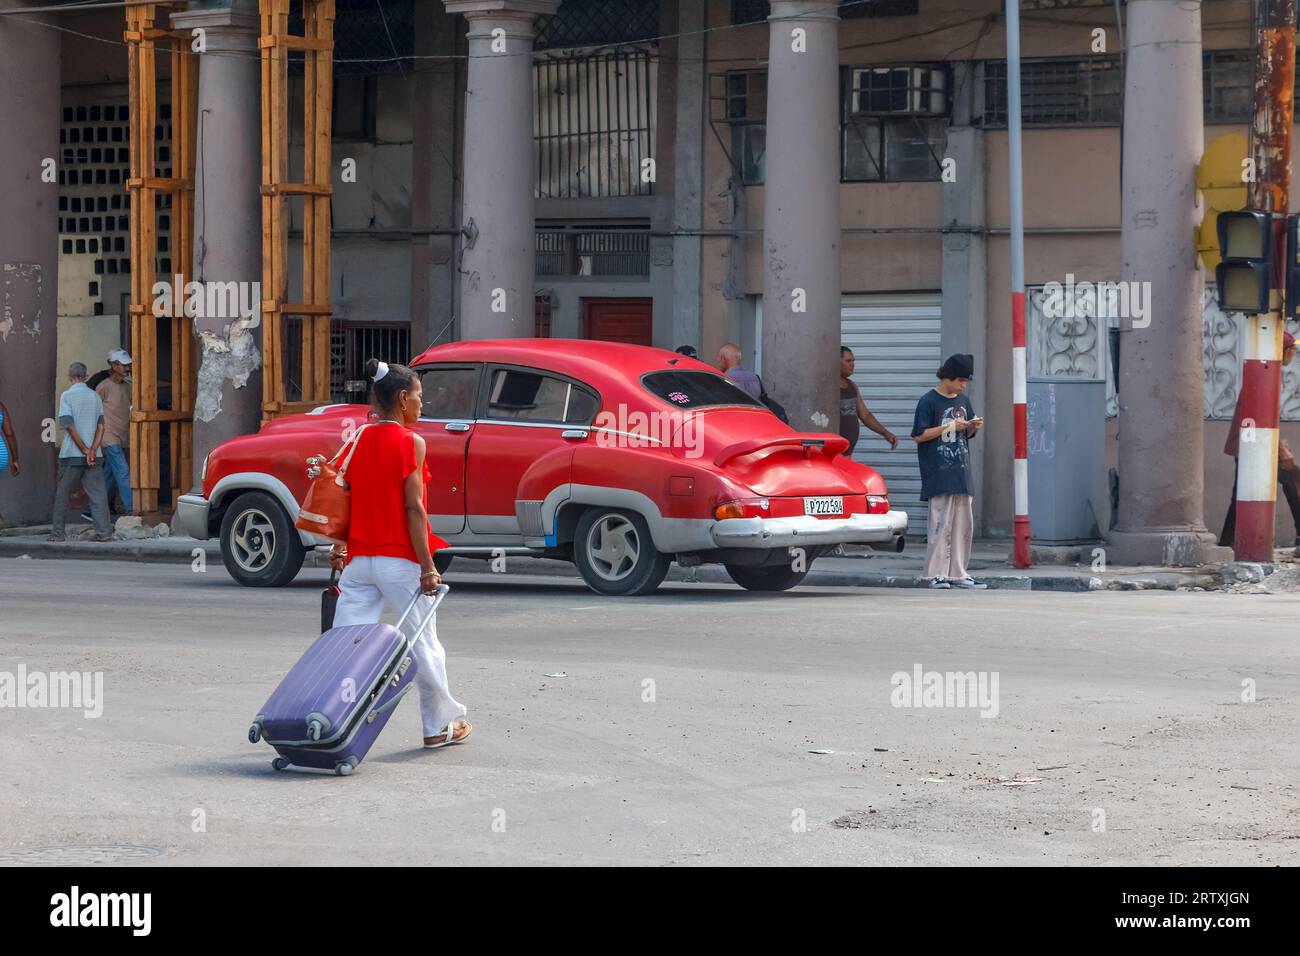 Havana, Cuba, 2023, A Cuban woman pulls a wheeled suitcase on a city street. A red vintage American car drives in the scene. Stock Photo